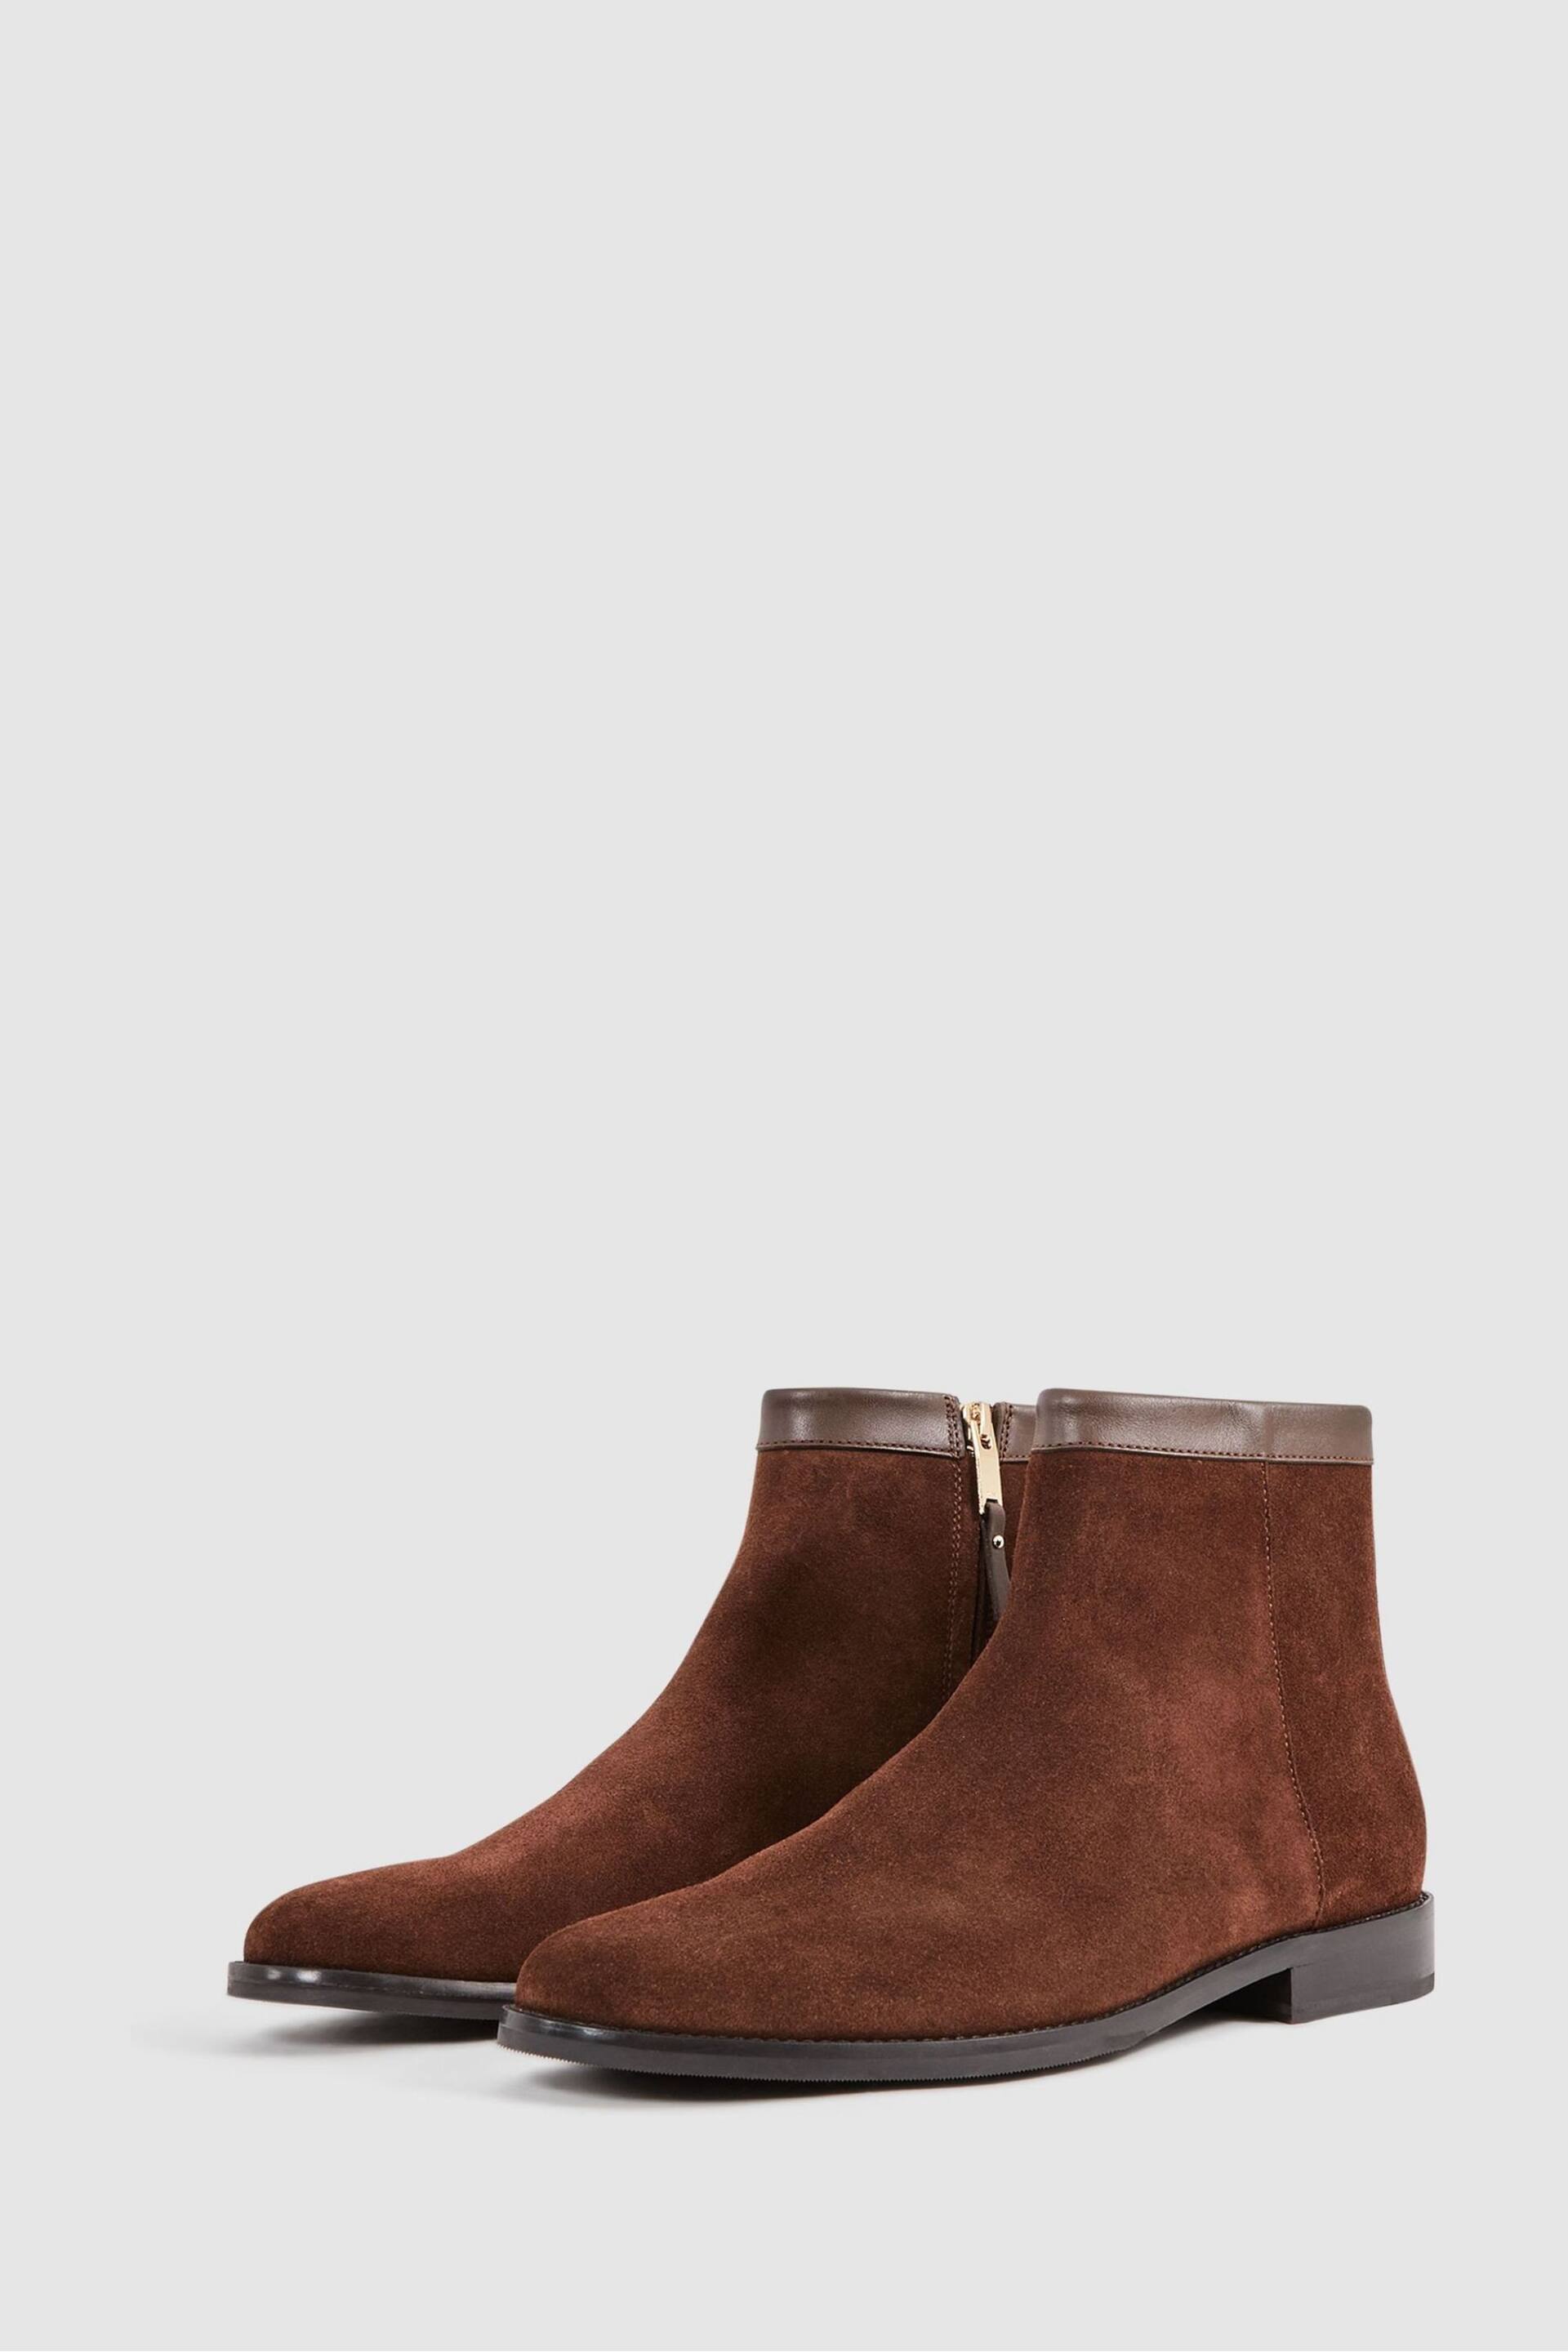 Reiss Brown Clay Suede Zip-Through Boots - Image 3 of 5